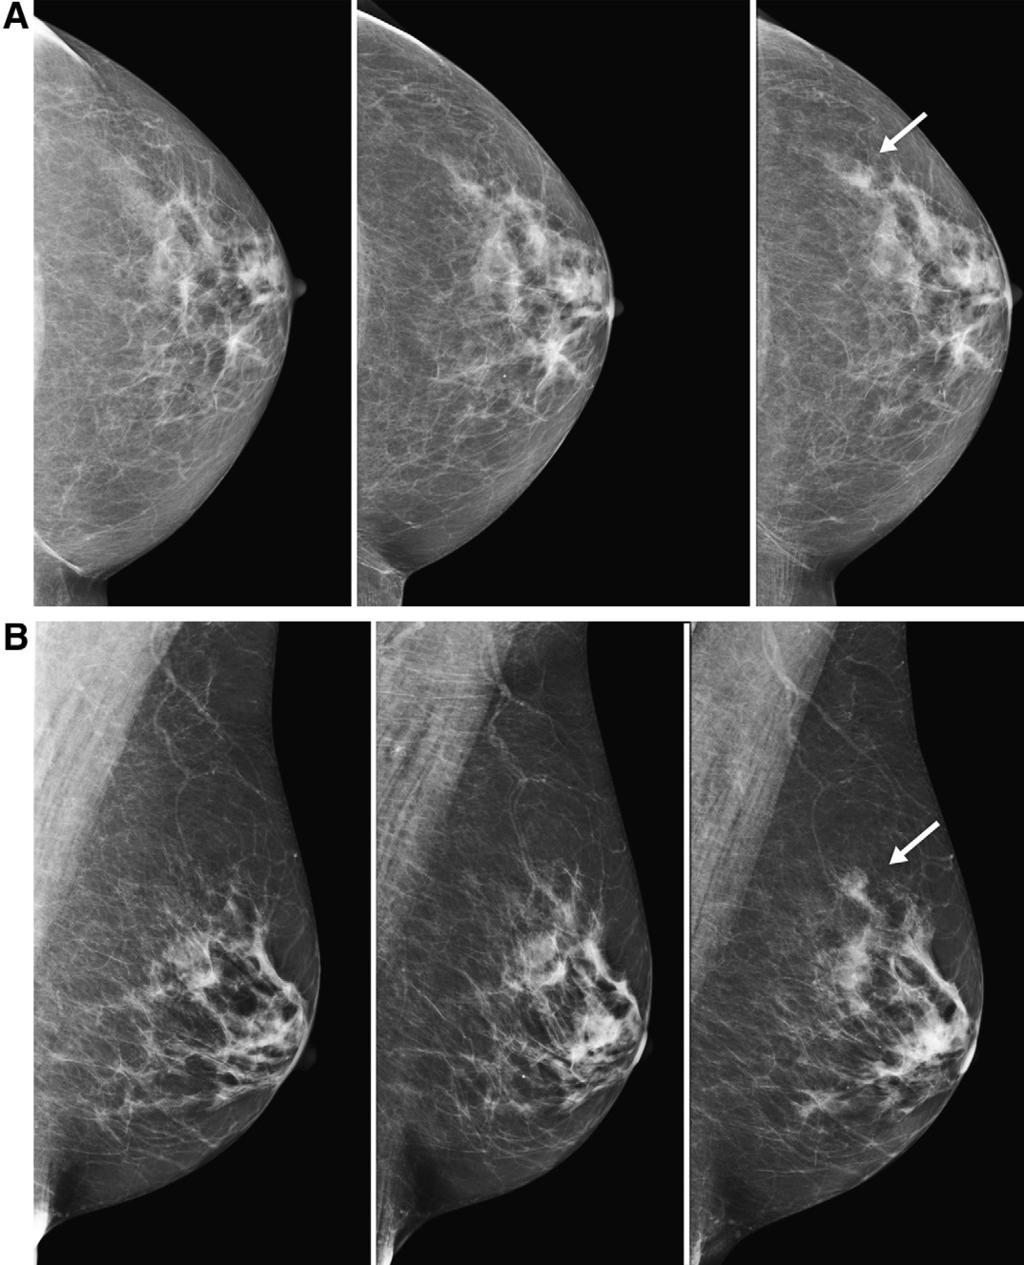 54 S. Roberts-Klein et al. / Canadian Association of Radiologists Journal 62 (2011) 50e59 Figure 5. A 67-year-old woman for screening.